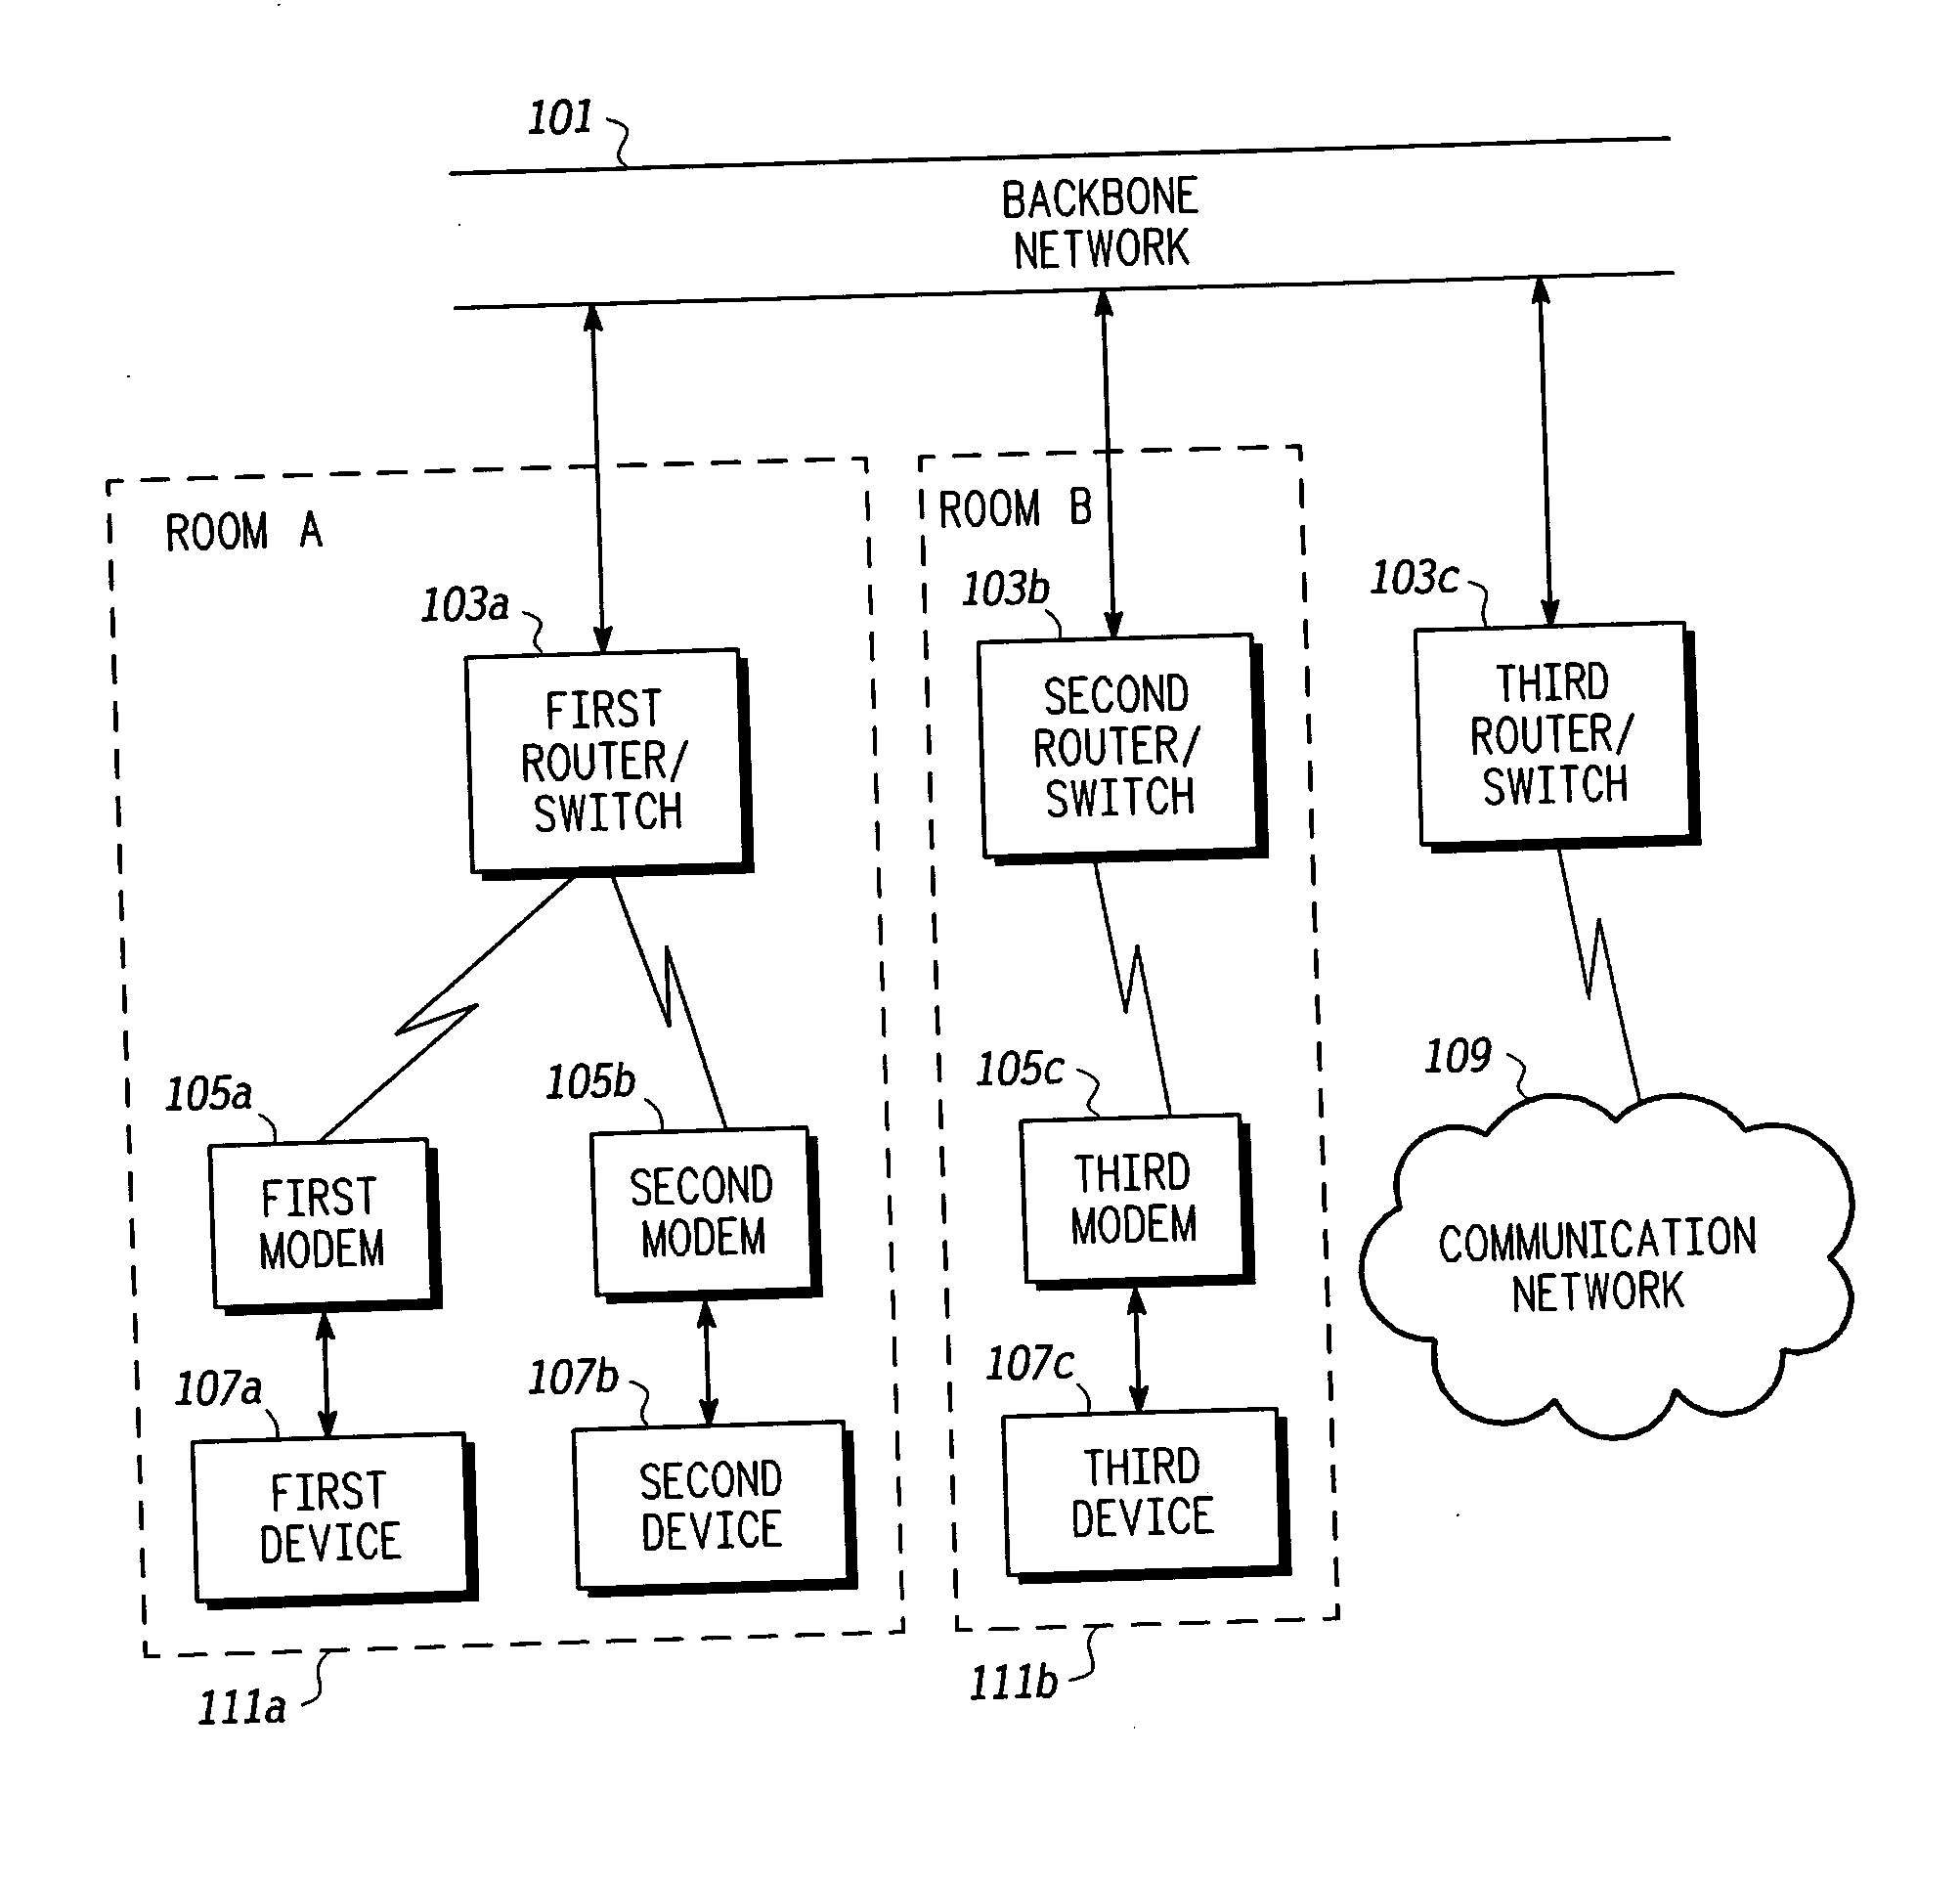 Priority queuing of frames in a TDMA network